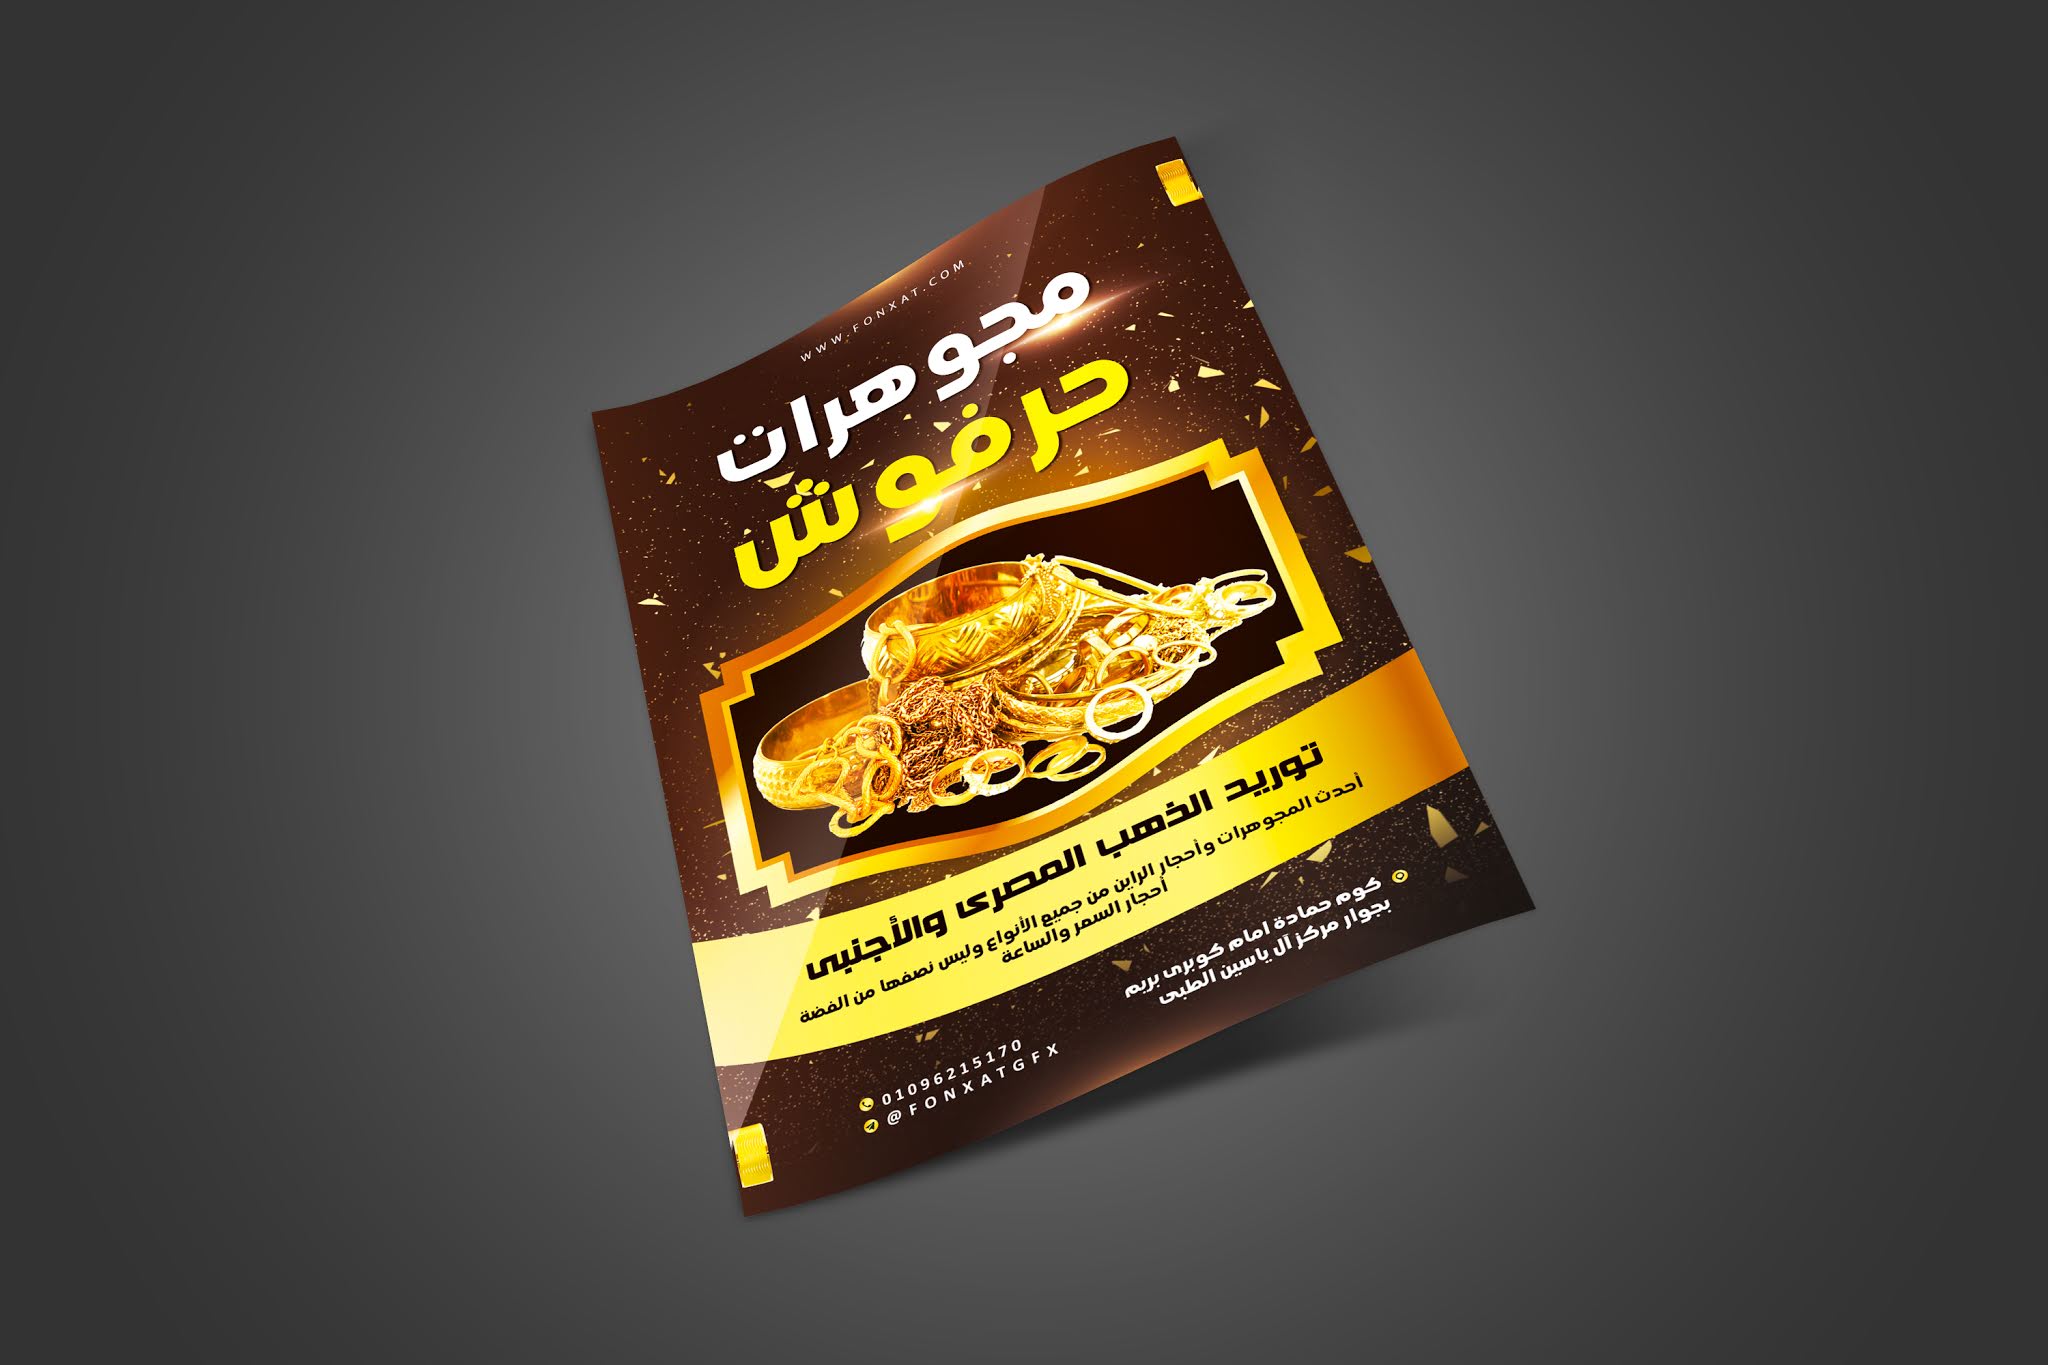 Special professional PSD flyer design for jewelry and silverware